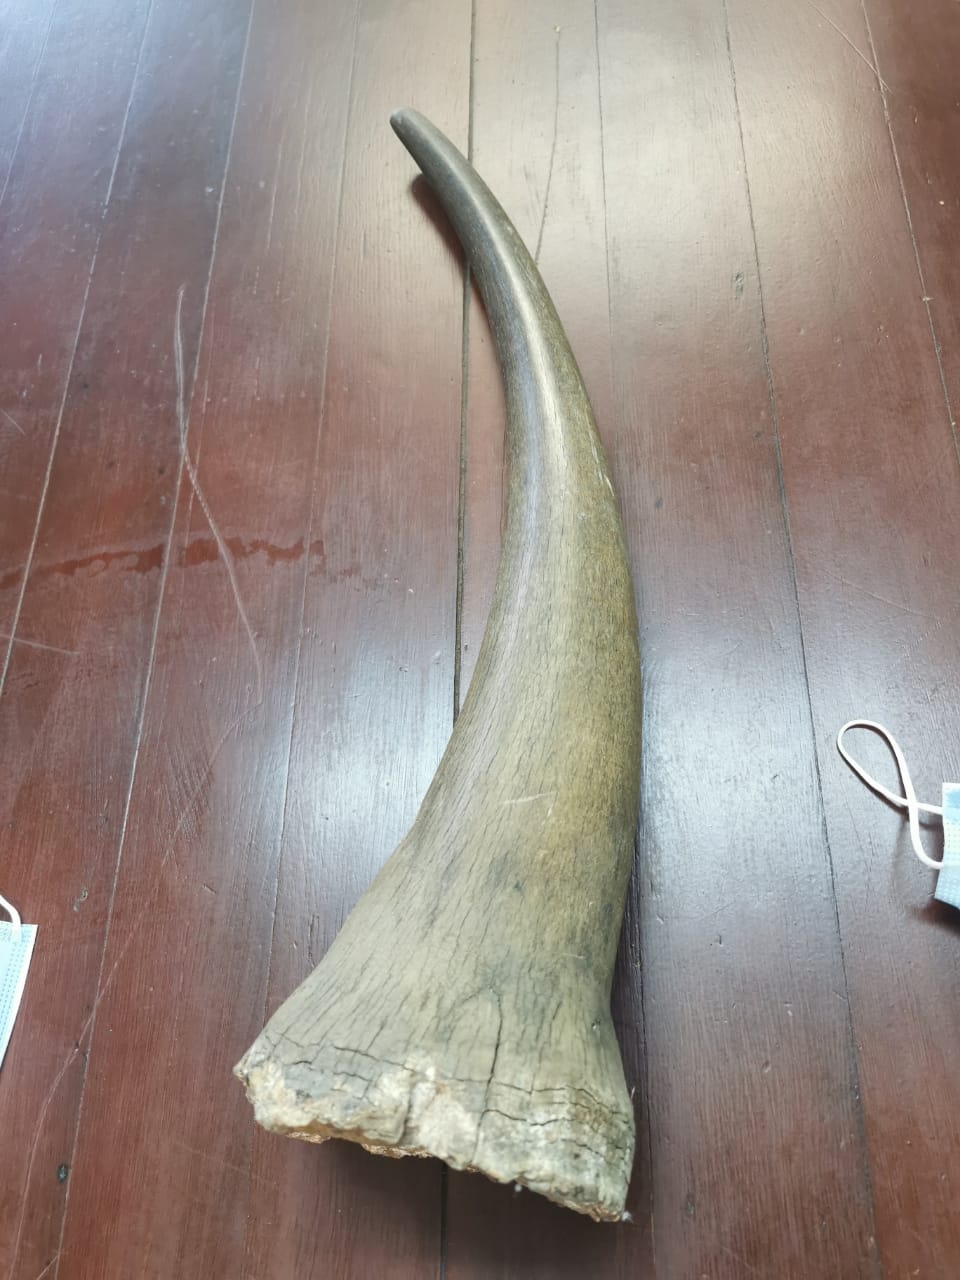 Two men arrested for possession of rhino horn